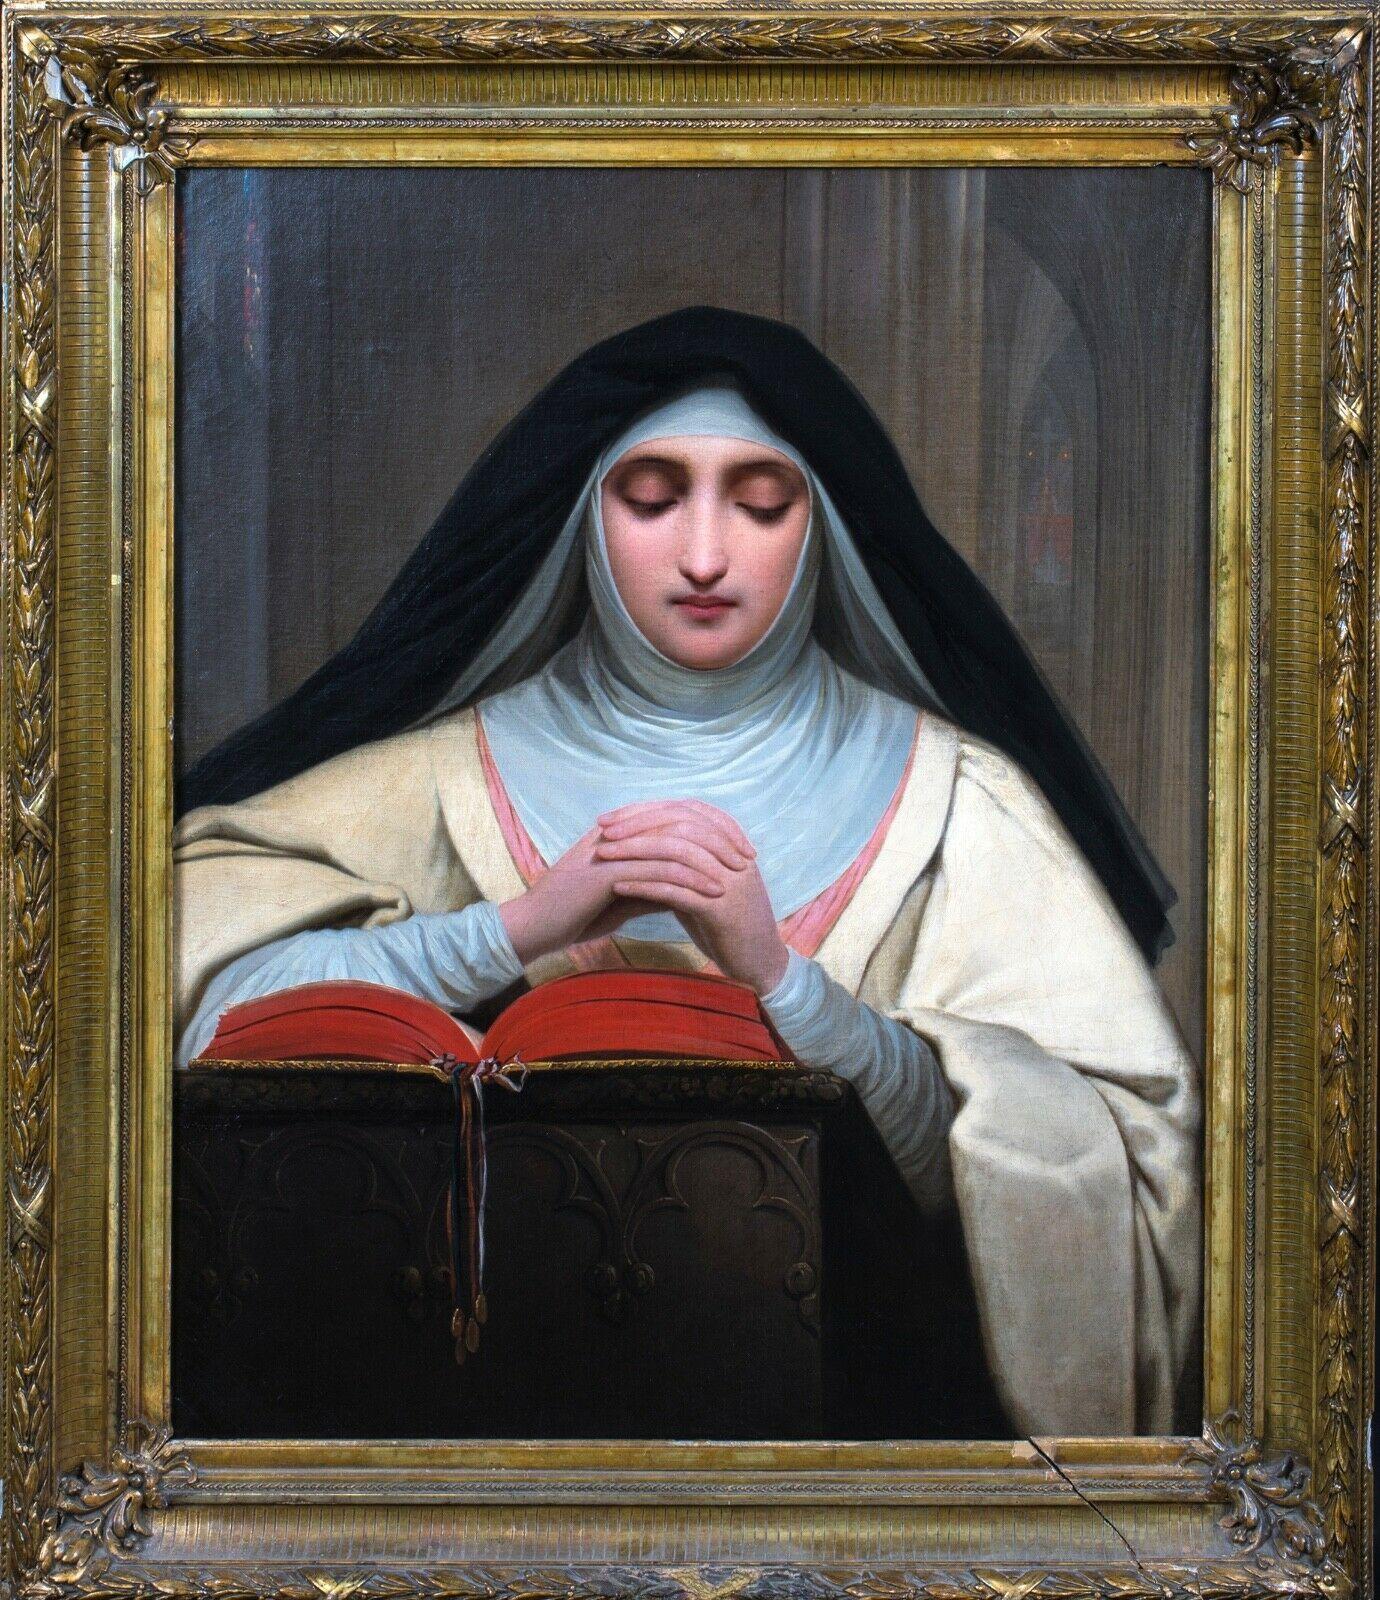 Portrait Of Saint Teresa Of Avila, 19th Century - Painting by Unknown